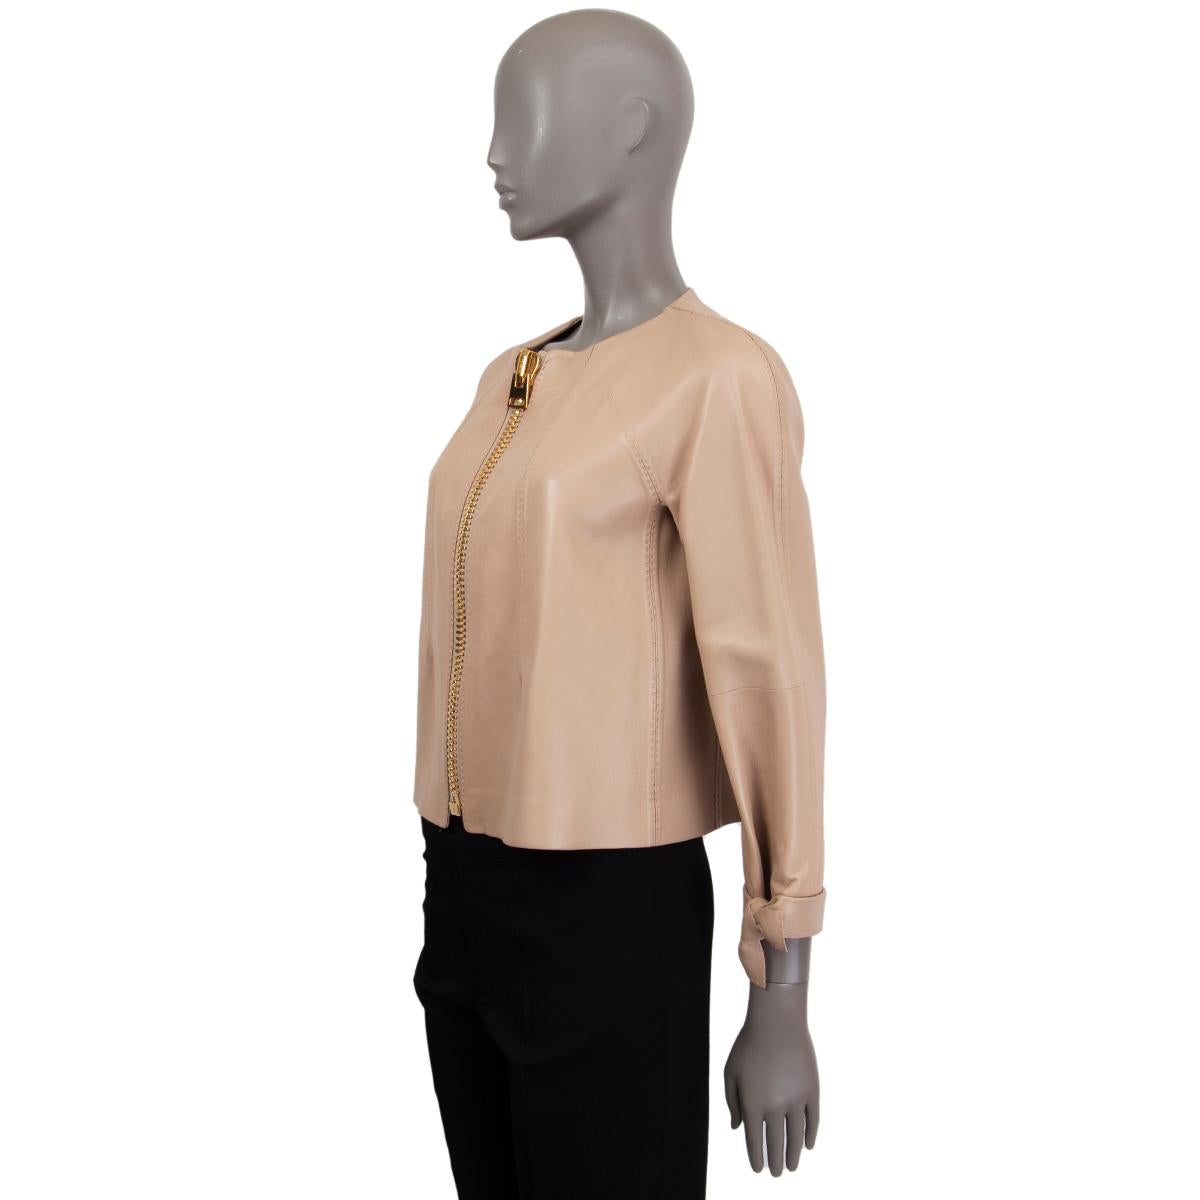 Tom Ford cropped jacket in nude nappa leather with heavy signature gold-tone metal zipper. Raglan sleeves with bow detail at bottom. Unlined. Has been worn once and is in excellent condition. 

Tag Size Missing Tag
Size S
Shoulder Width 39cm